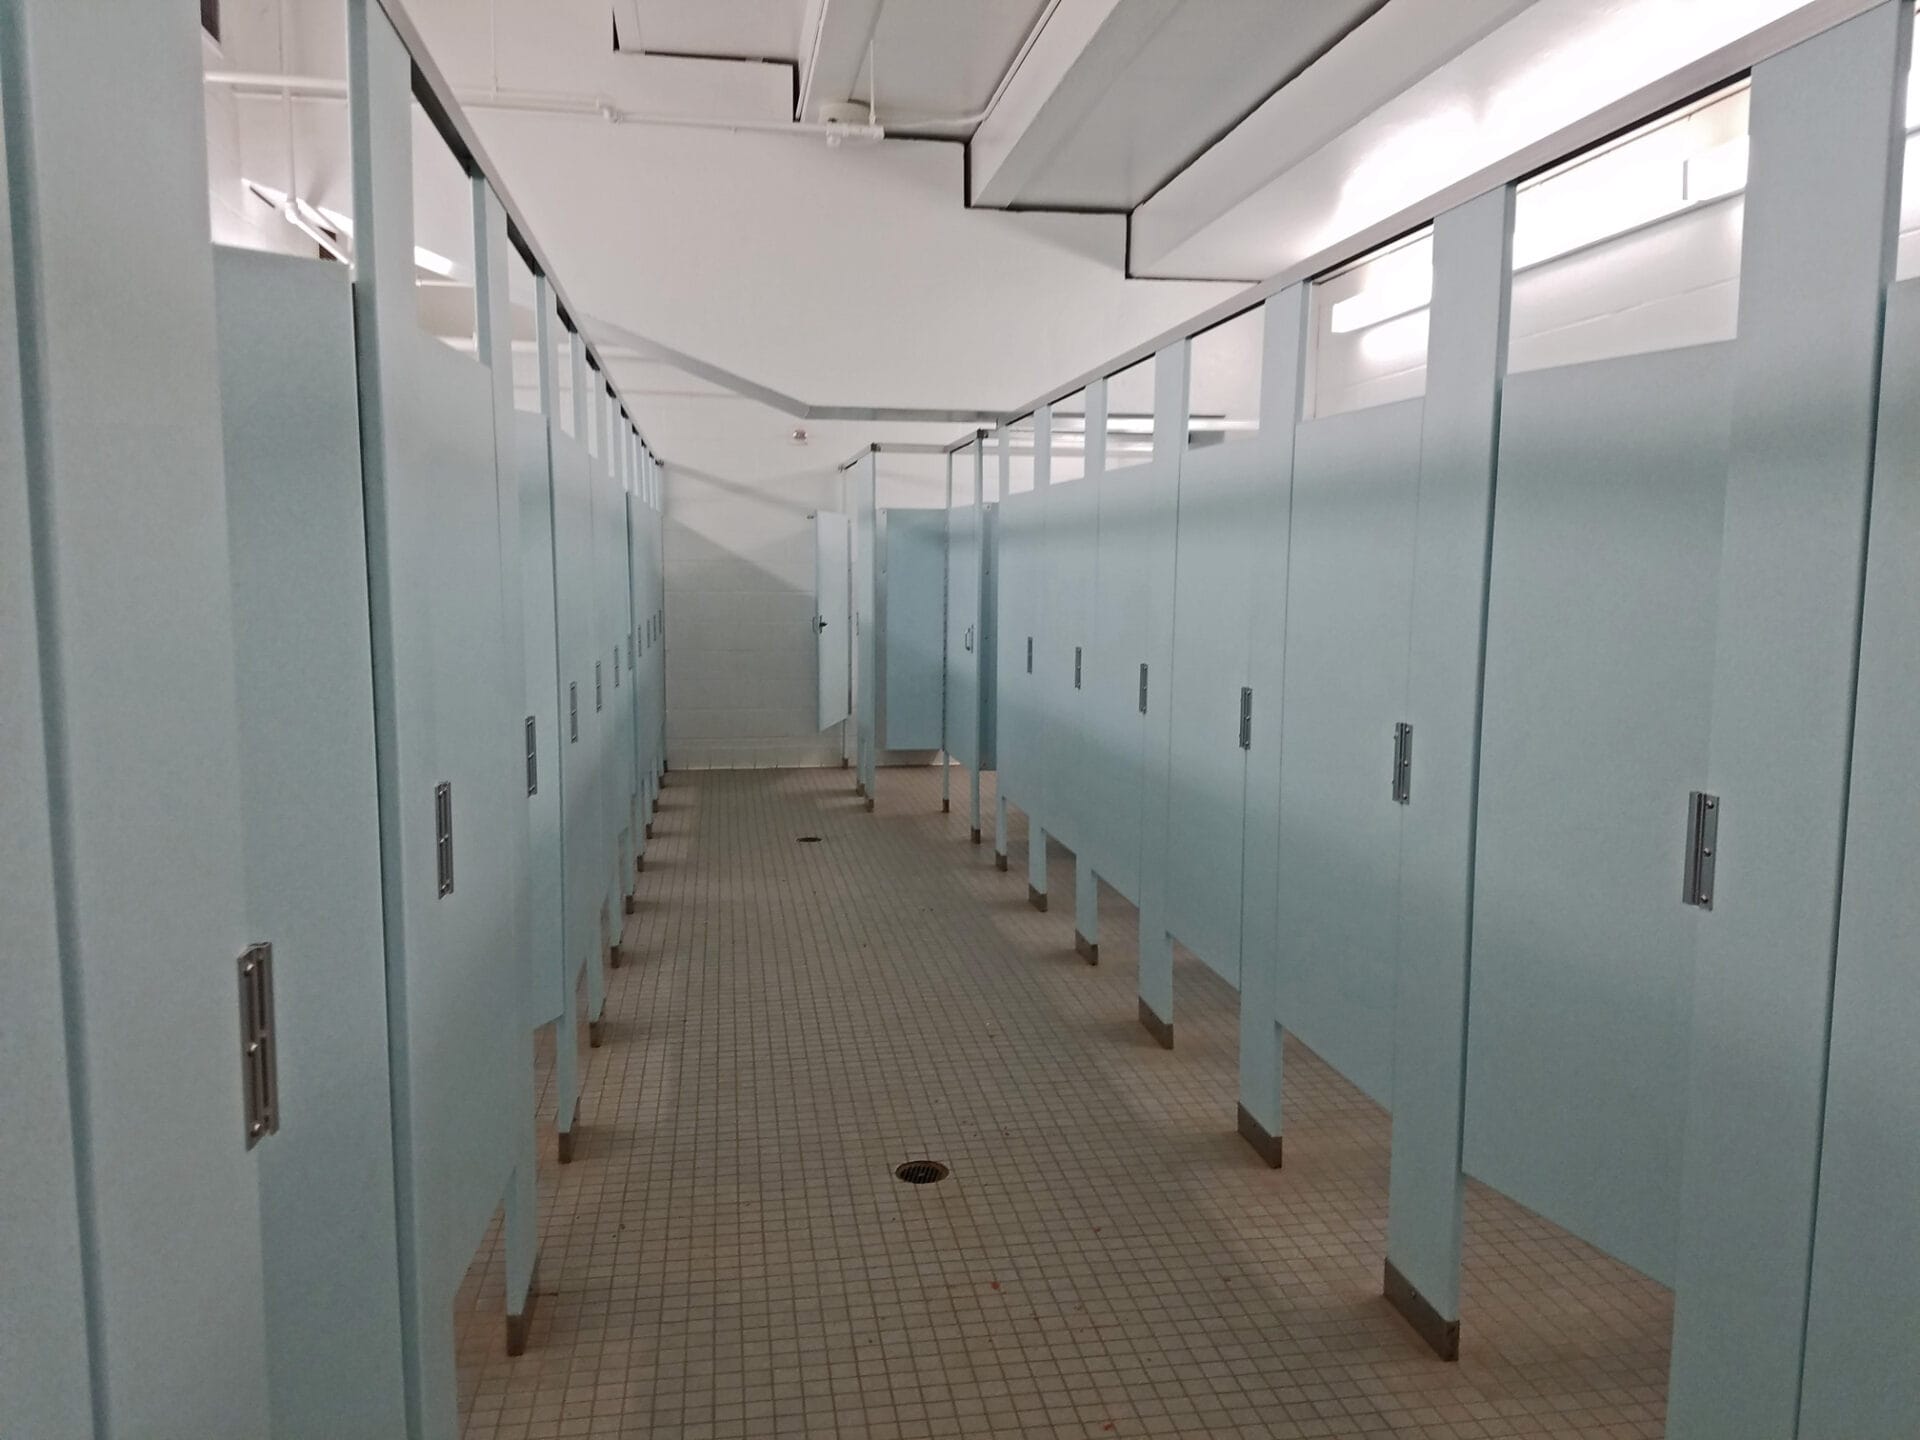 long row with bathroom stalls on both sides at Turner Agri-Civic Center, Arcadia FL